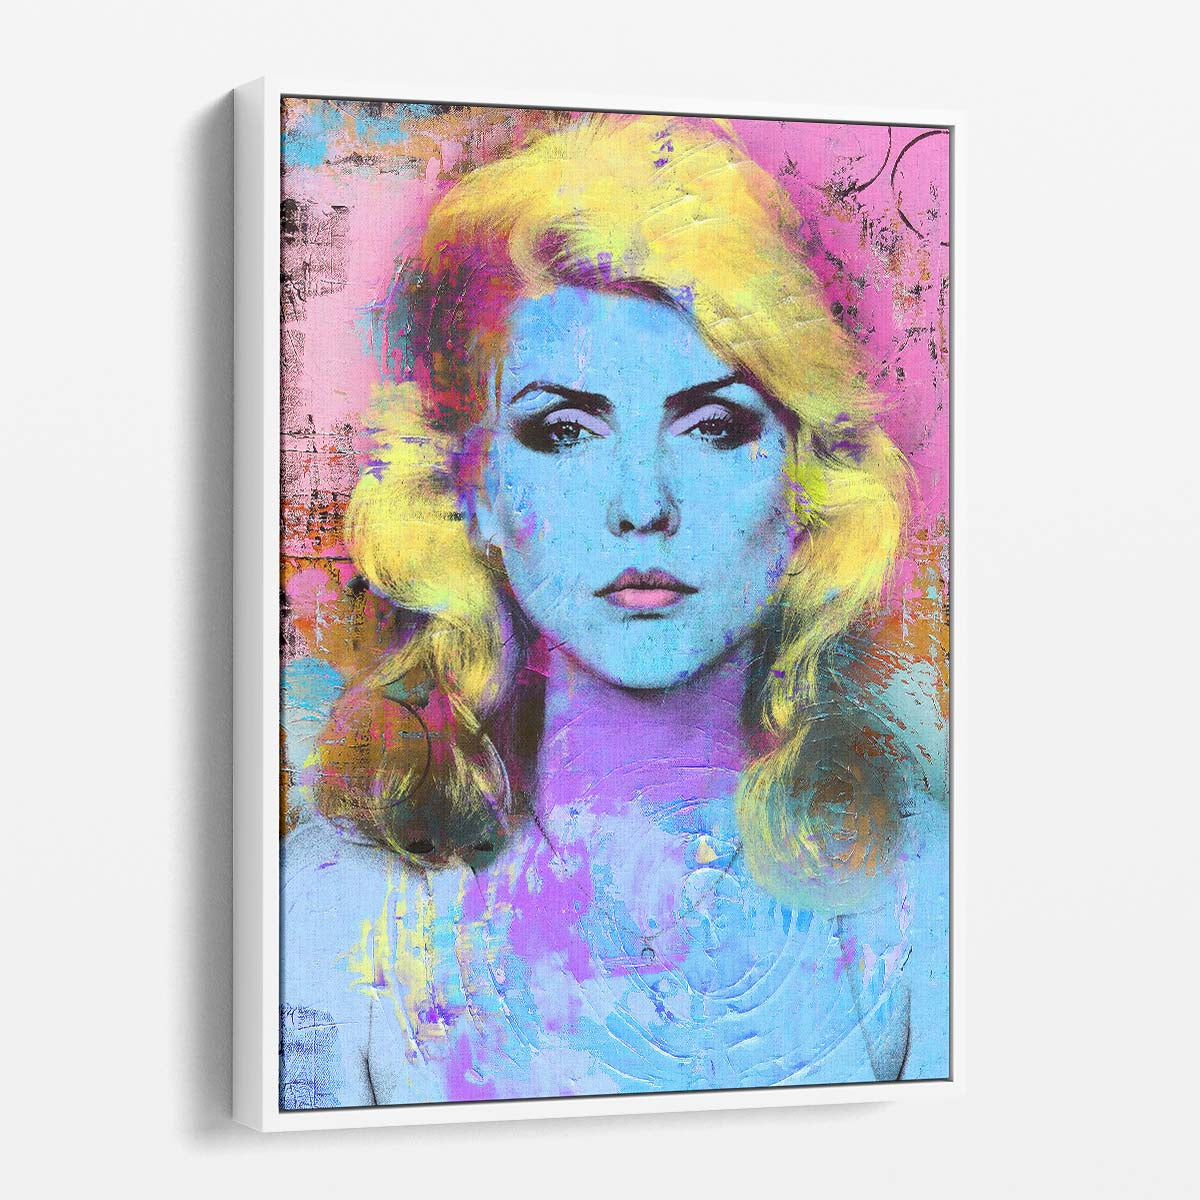 Debbie Harry Circles Graffiti Wall Art by Luxuriance Designs. Made in USA.